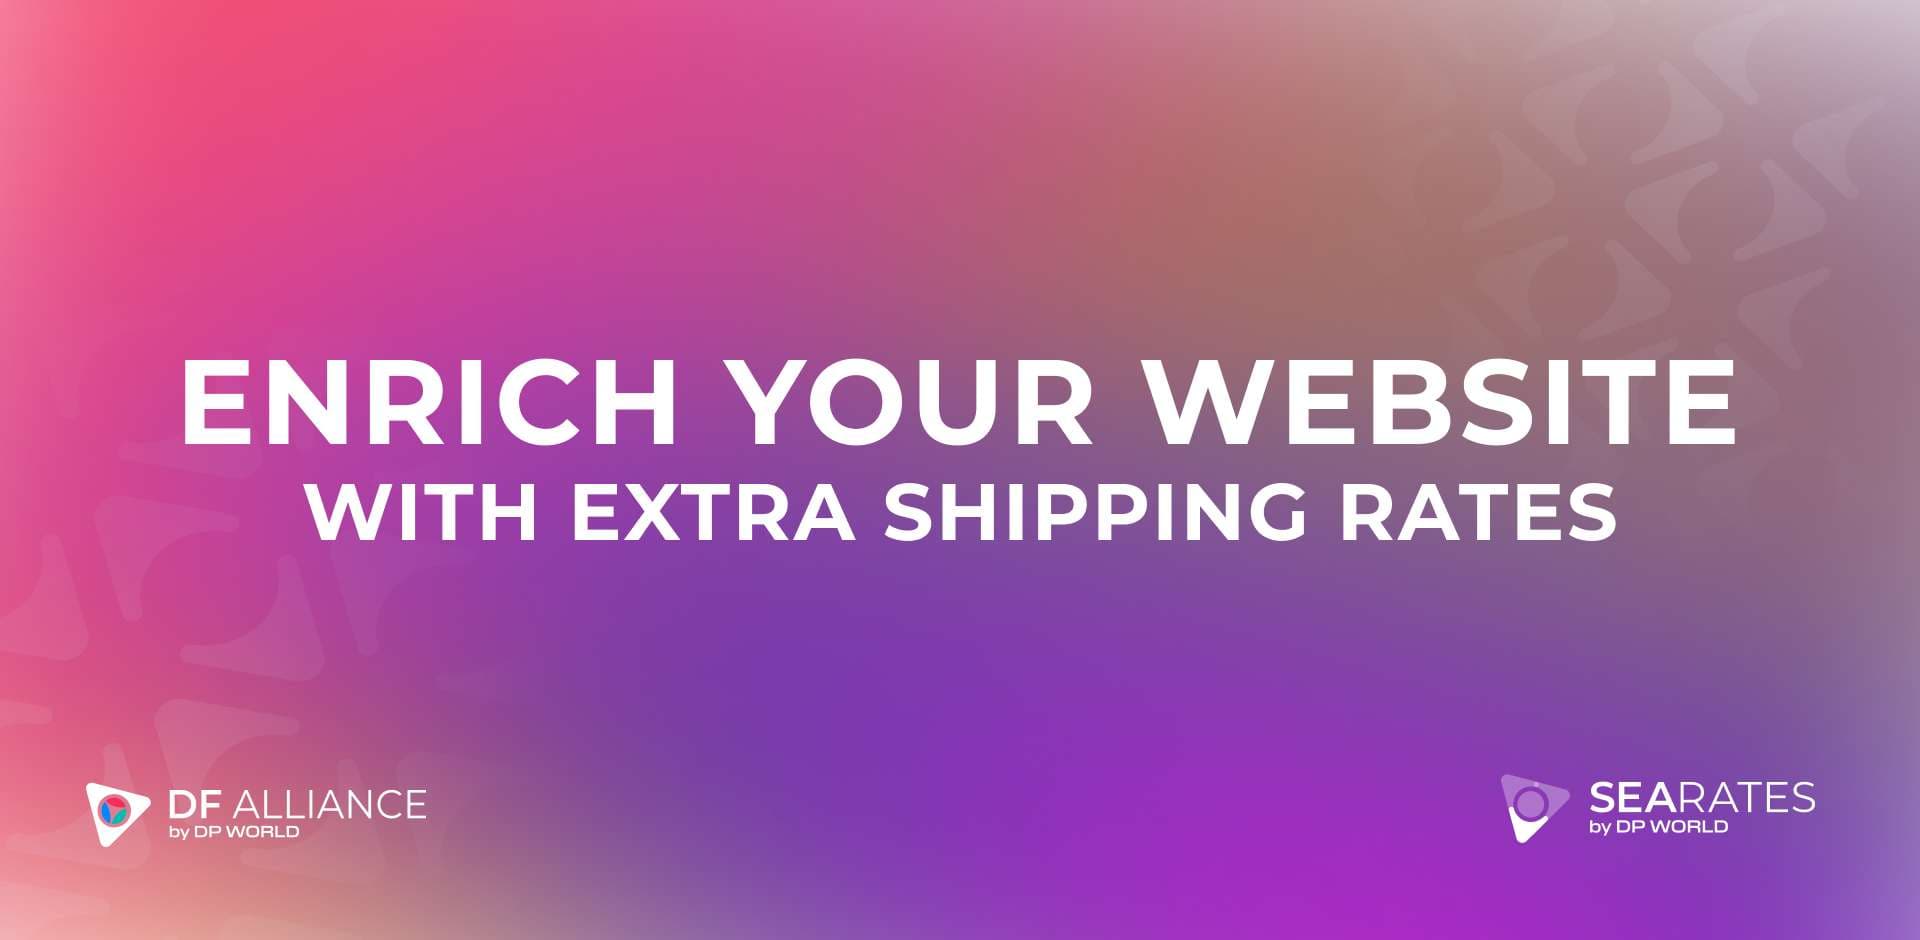 Freight Forwarding Partnership Insights: How to Enrich Your Website with Additional Shipping Rates